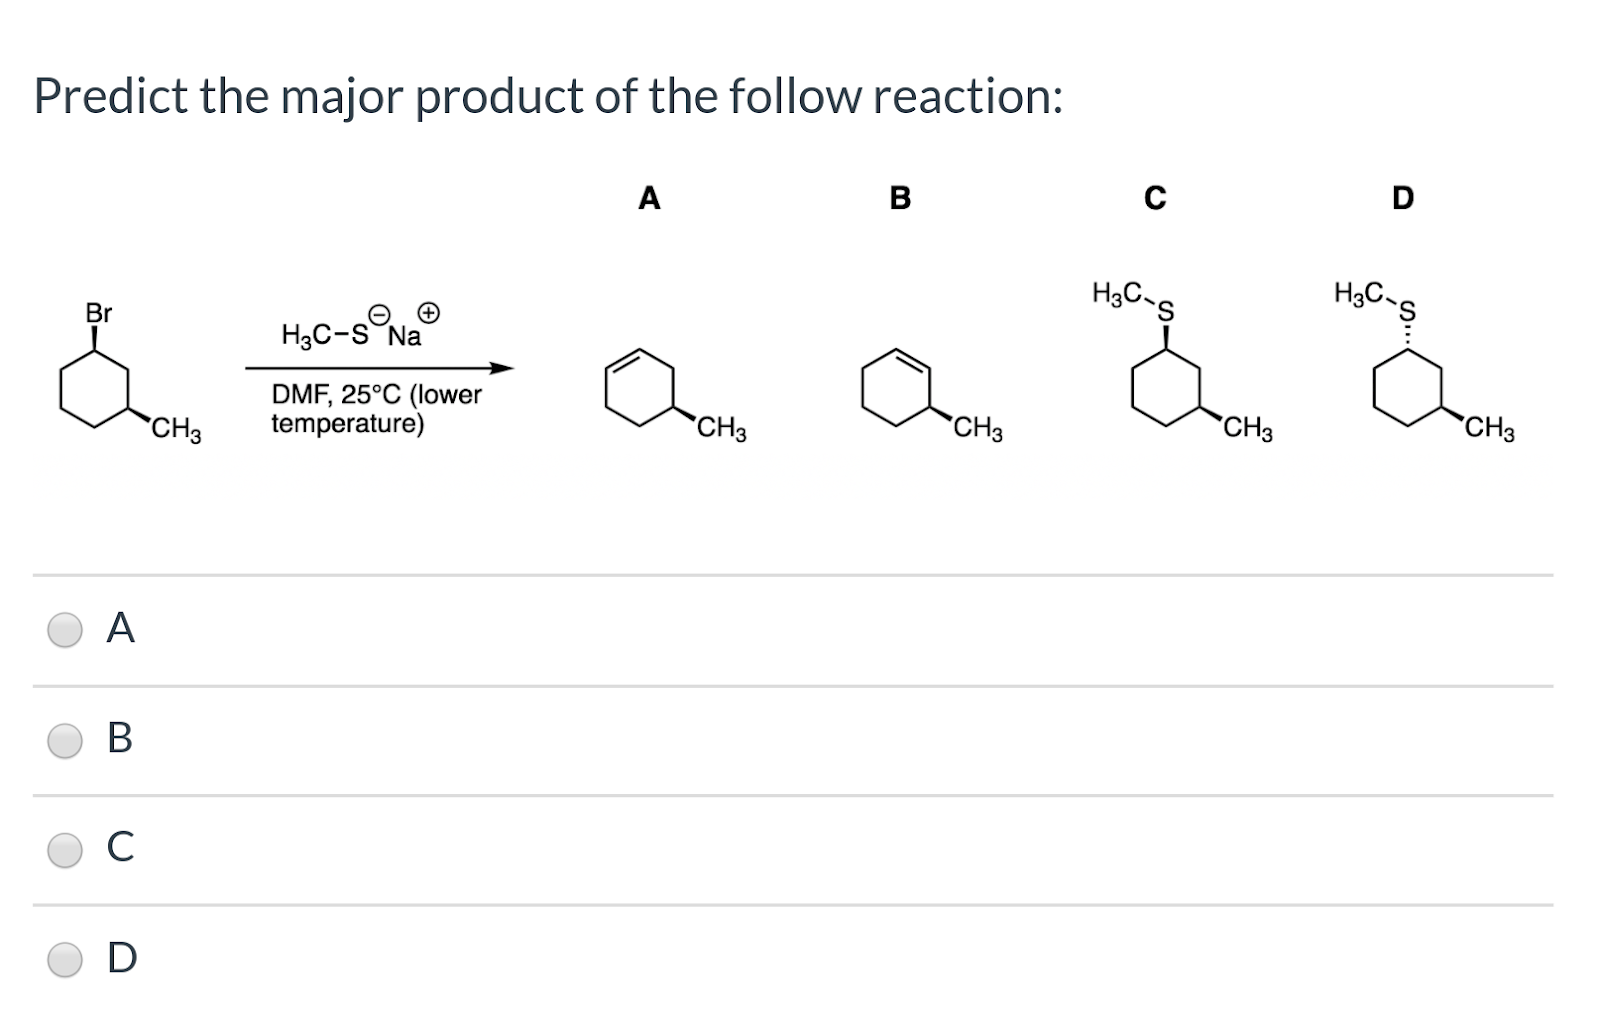 Predict the major product of the follow reaction: H3C~s H3C-s H2C-S Na & mehet a no con la na DMF, 25°C (lower temperature) C